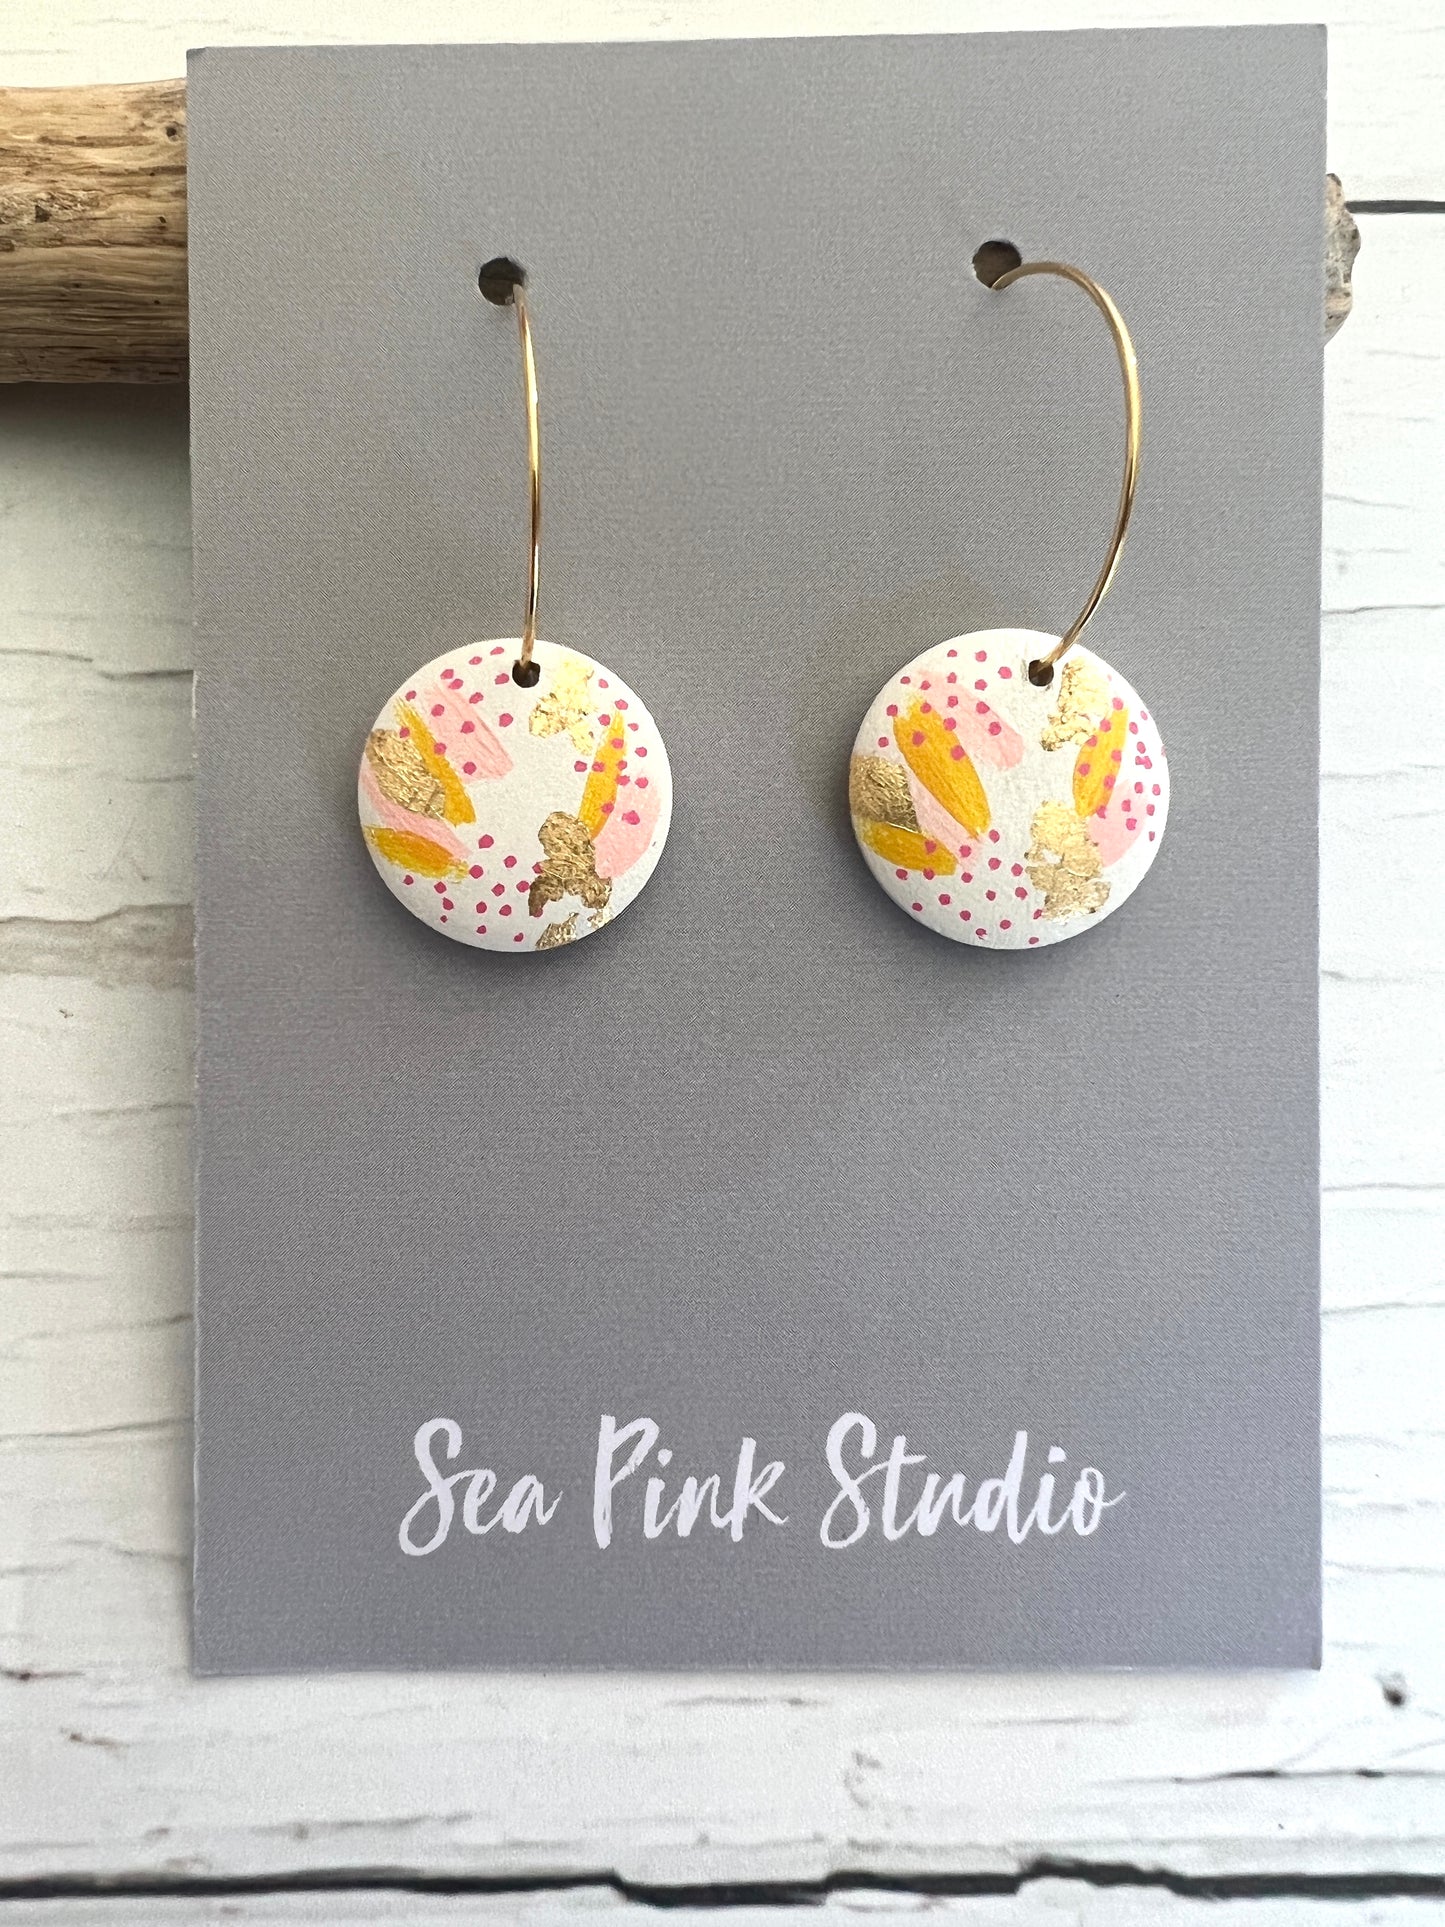 Hand-painted Wooden Bead Statement Earrings